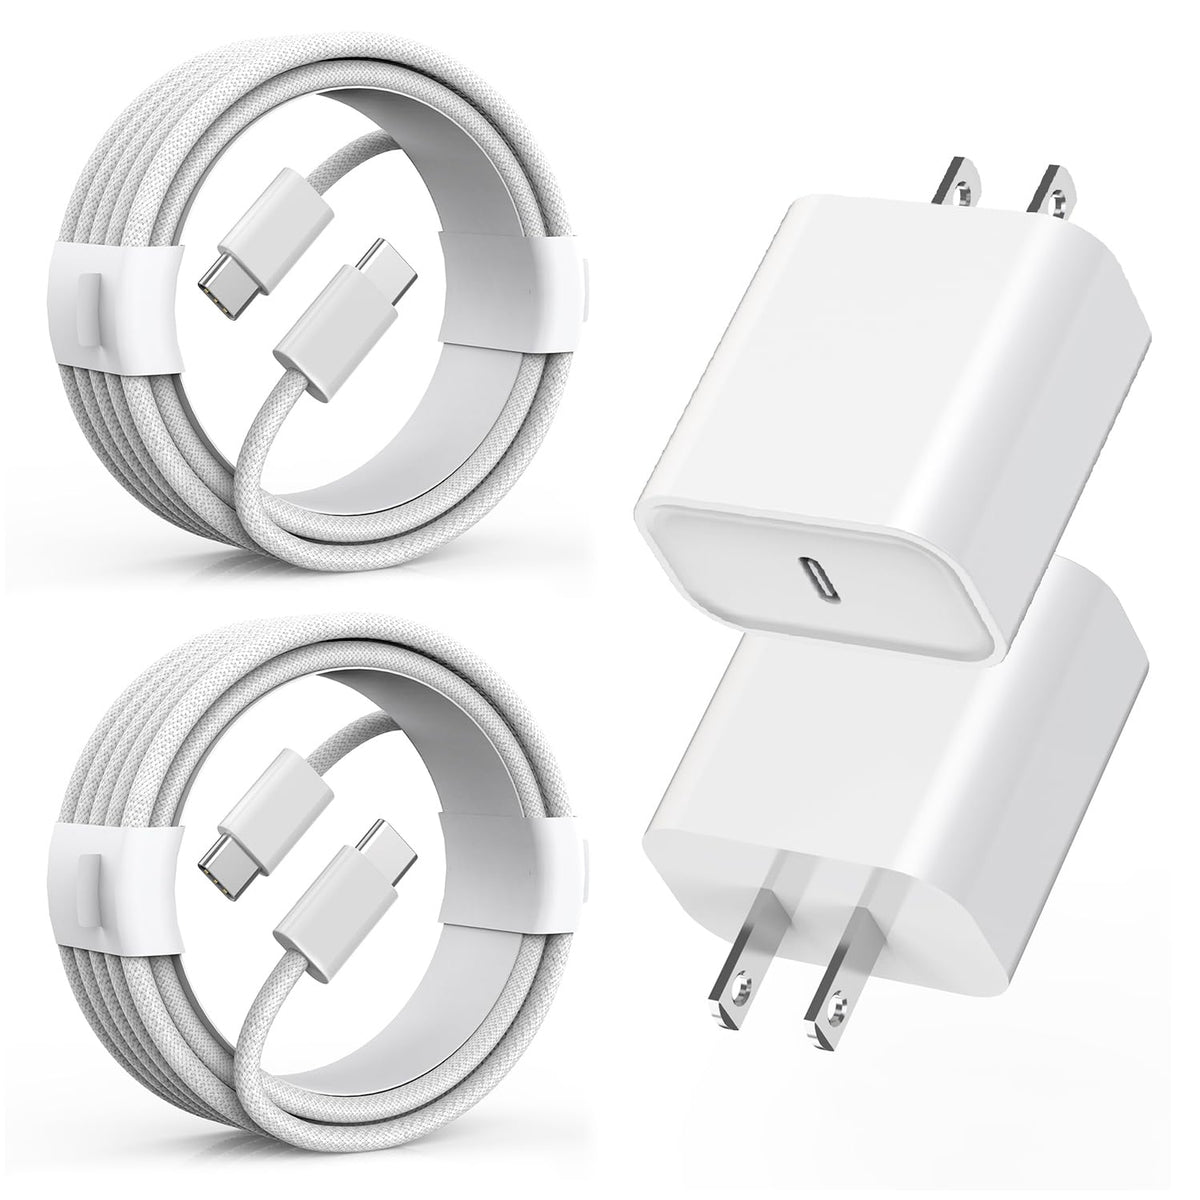 Long Charger for iPhone 15 Charger Fast Charging,20W USB C PD iPad Charger 2-Pack 6FT Type C to C iPhone 15 Charging Cable Cord for iPhone 15/15 Plus/15 Pro Max,iPad Pro 12.9/11 inch/4/3 Gen/Air/Mini